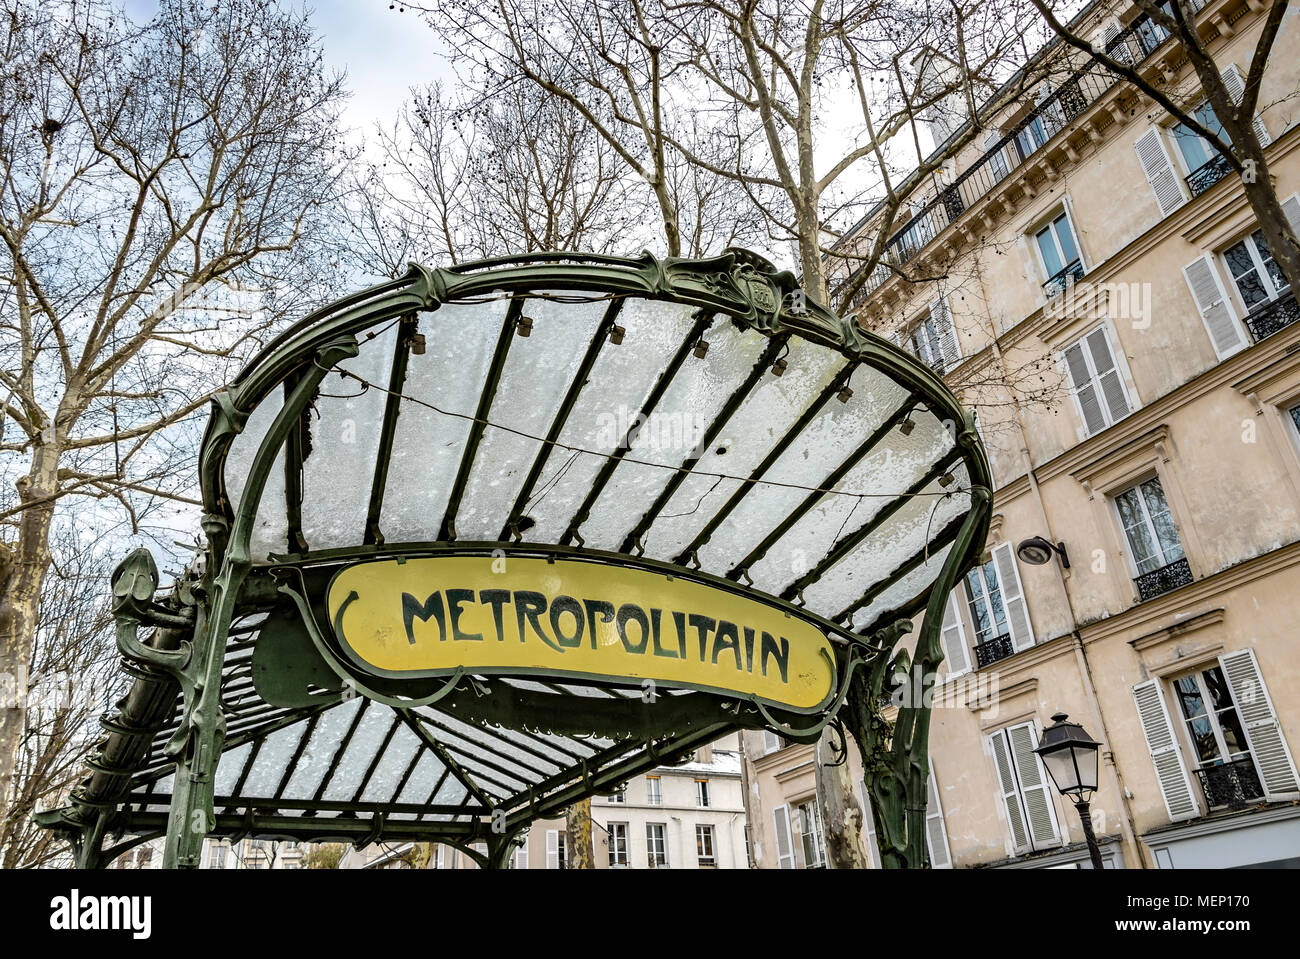 Entrance to Abbesses metro station designed by Hector Guimard one of only two original glass covered Guimard entrances Abbesses Montmartre,Paris Stock Photo